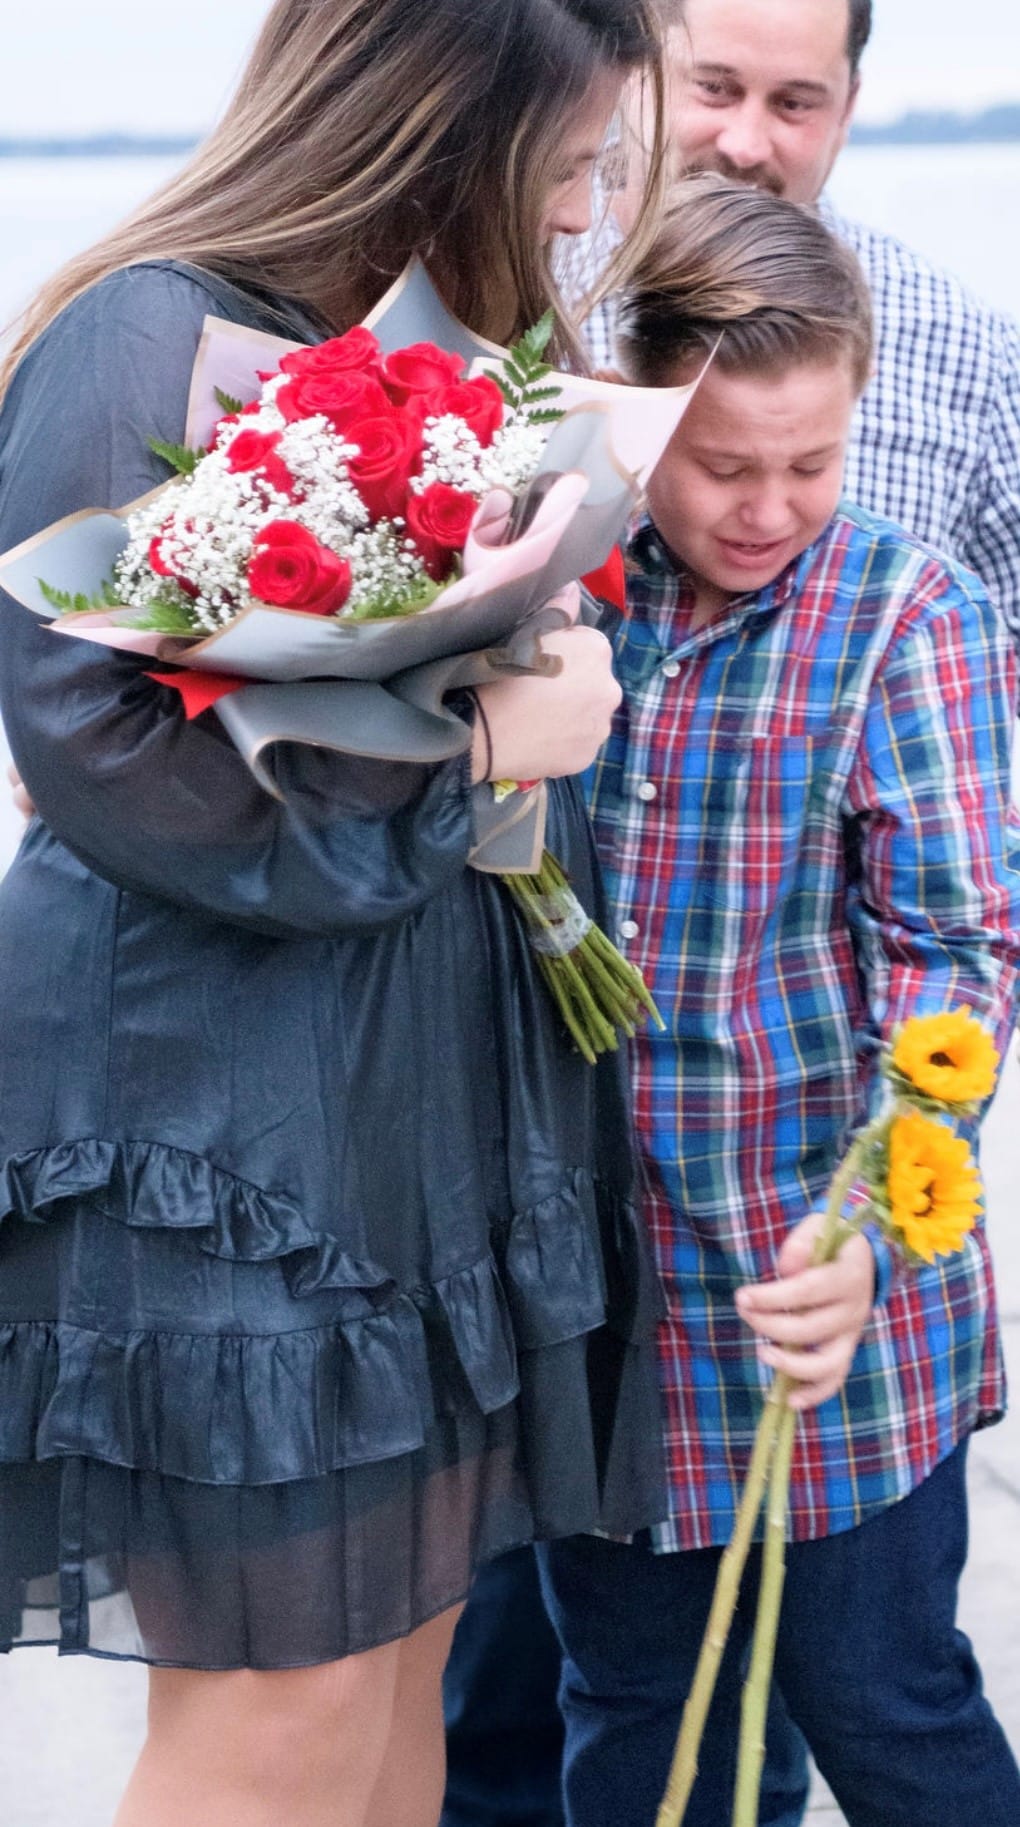 woman holds bouquet of white and red roses while hugging a boy in a plaid shirt holding sunflowers